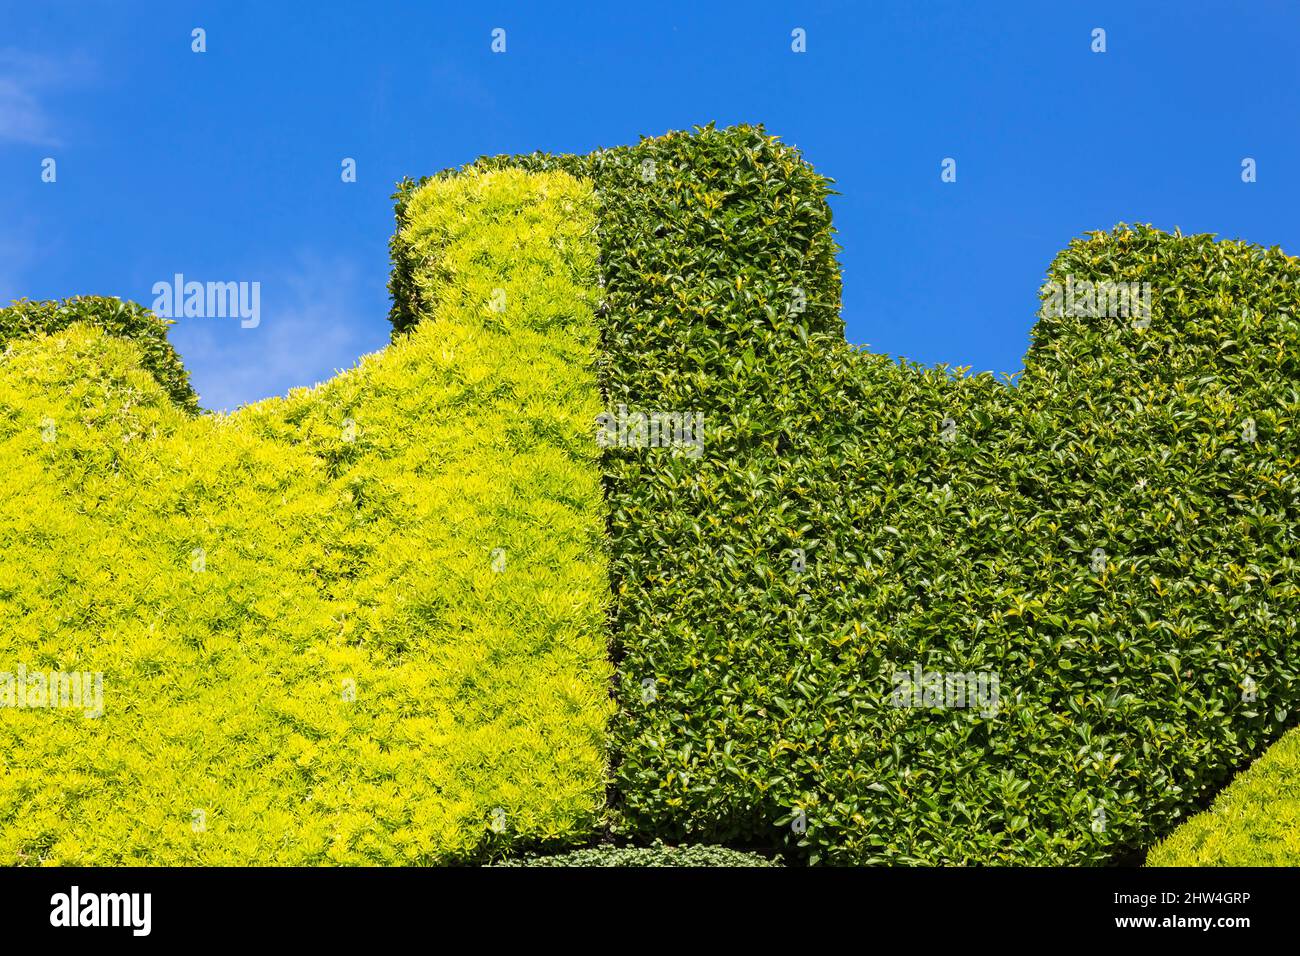 Toothed wheel shaped vertical garden wall planted with Sedum acre - Golden Carpet Stonecrop and Alternanthera in late summer. Stock Photo